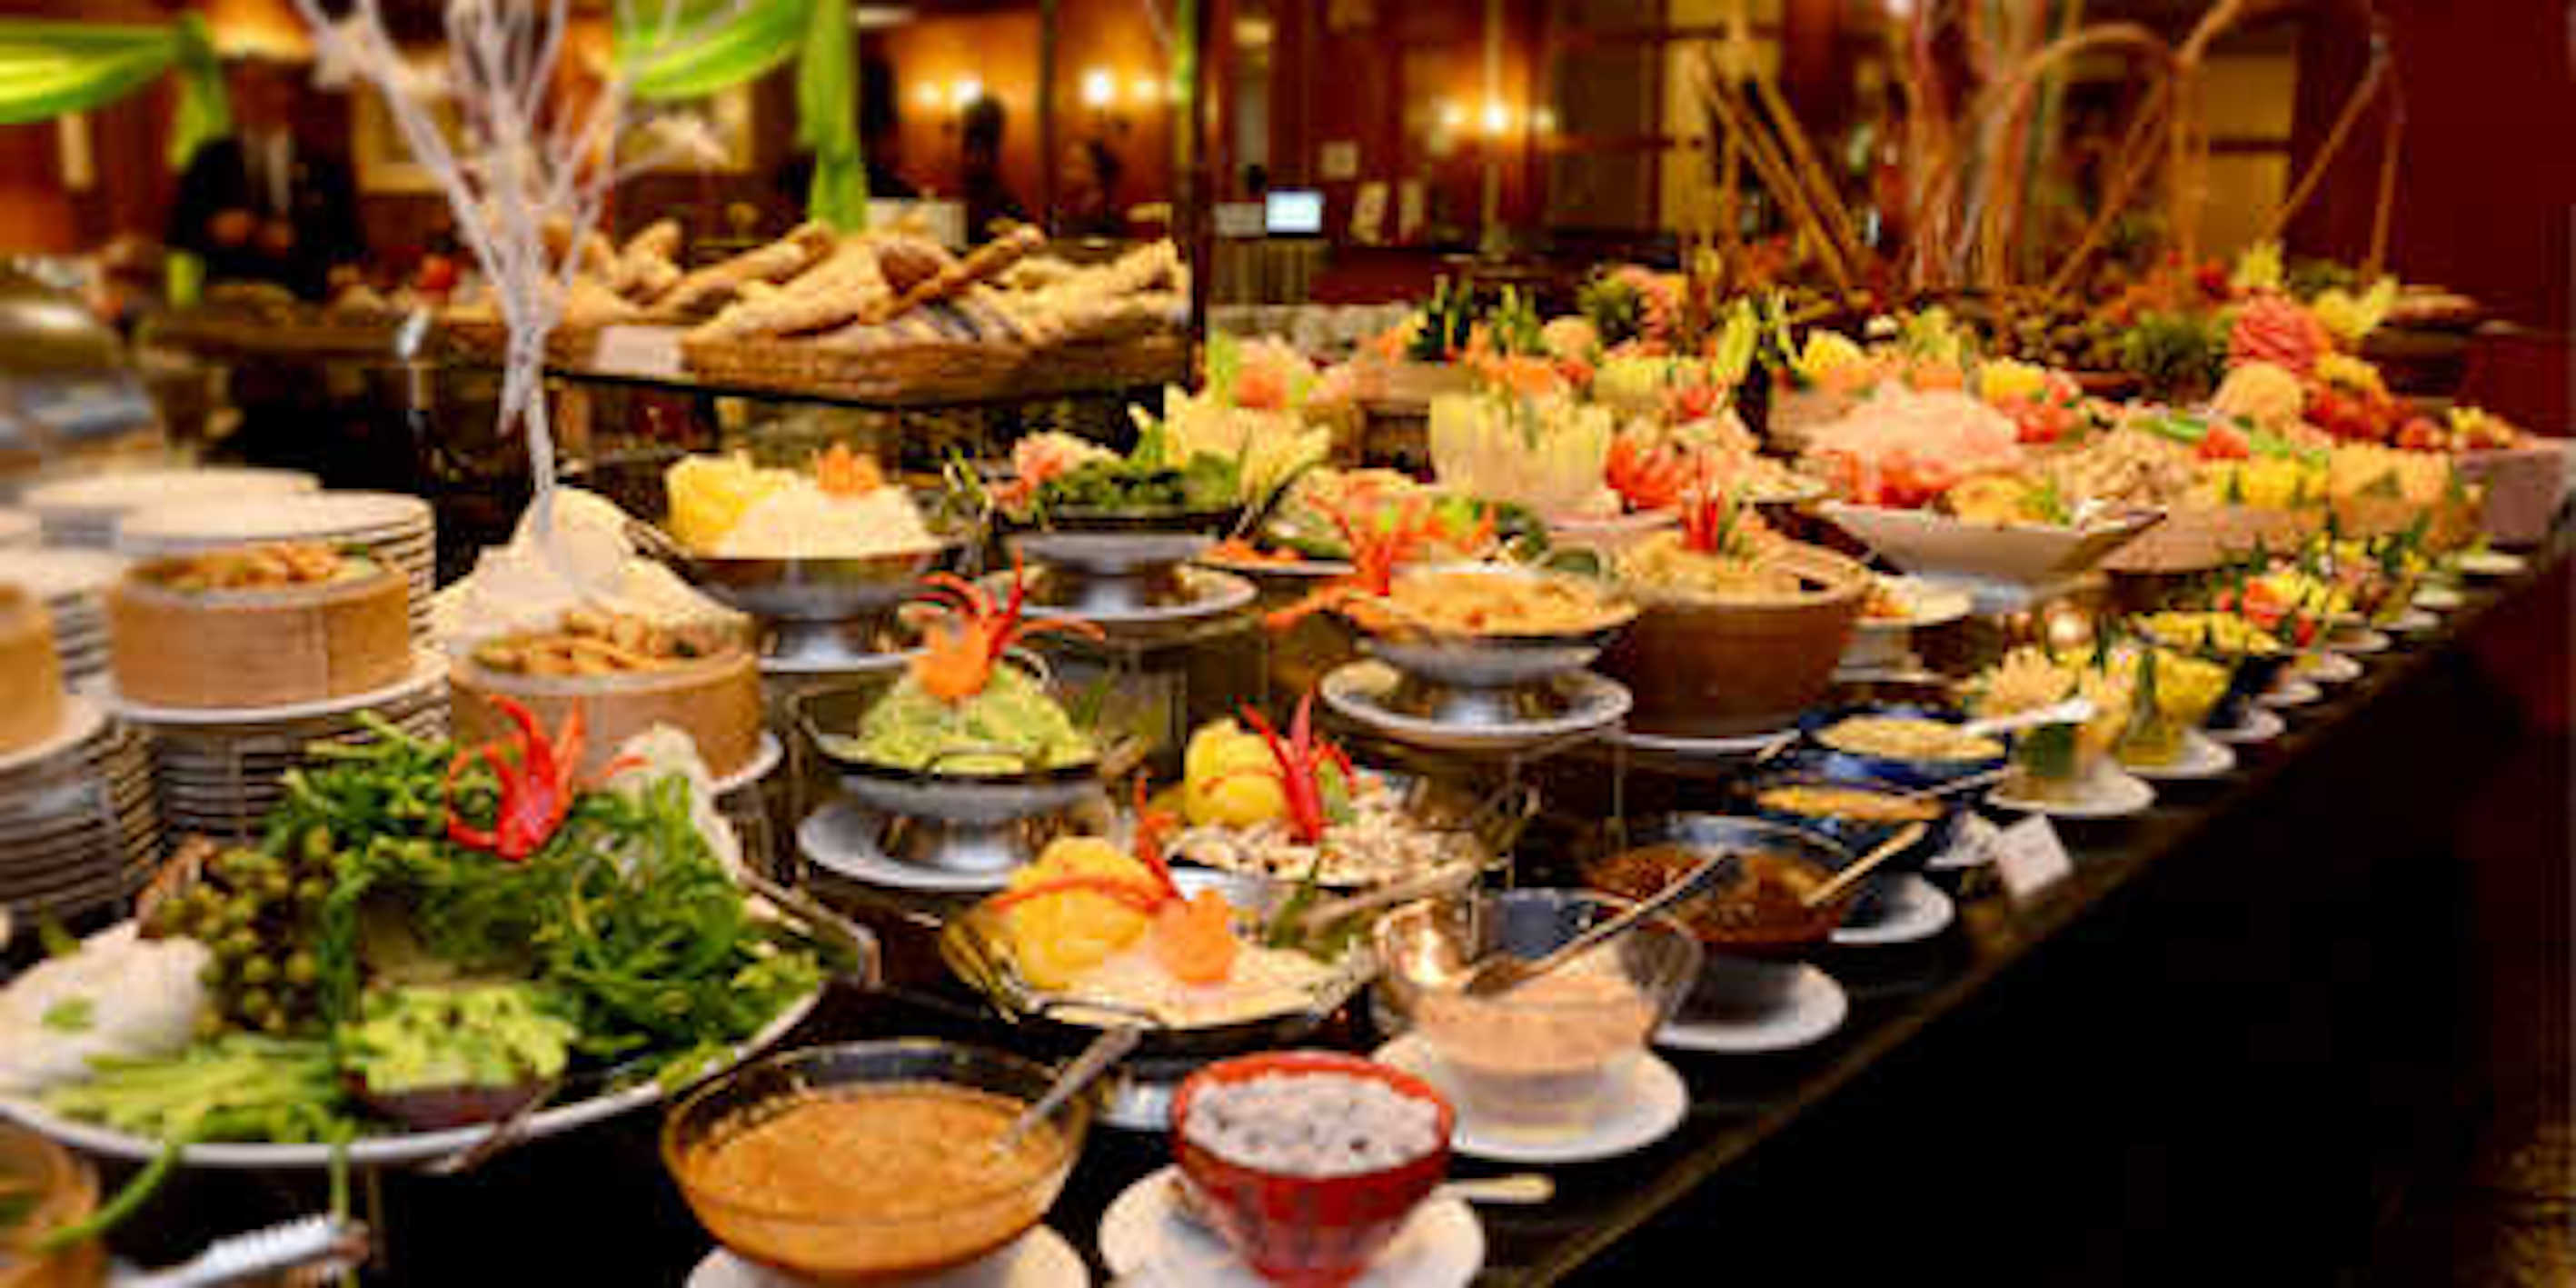 Buffet Restaurants : Are They Sustainable?